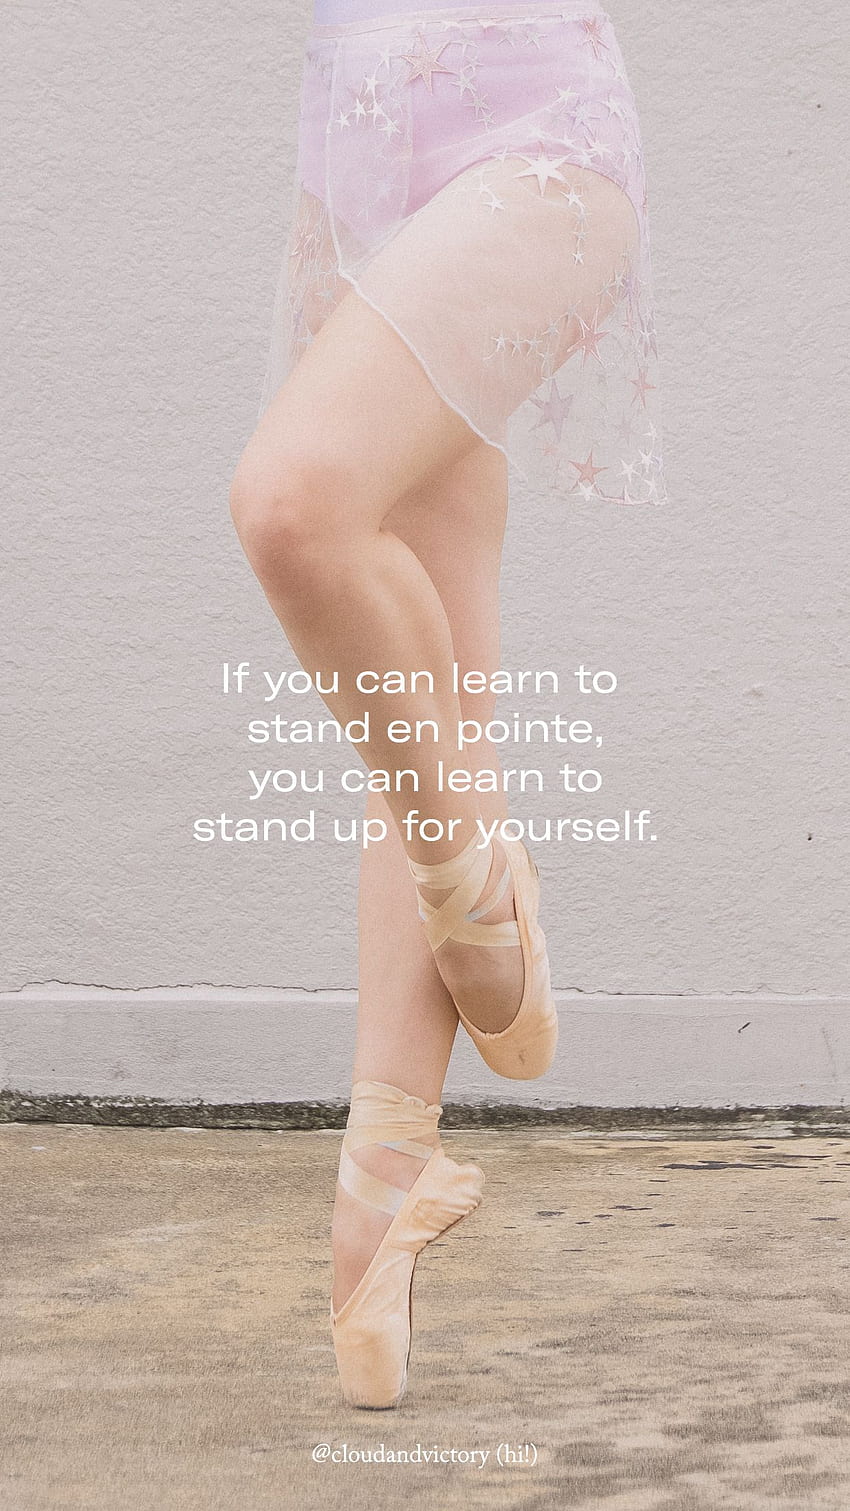 A ballerina in a pink leotard and white tights stands on her toes in front of a white wall. The quote 